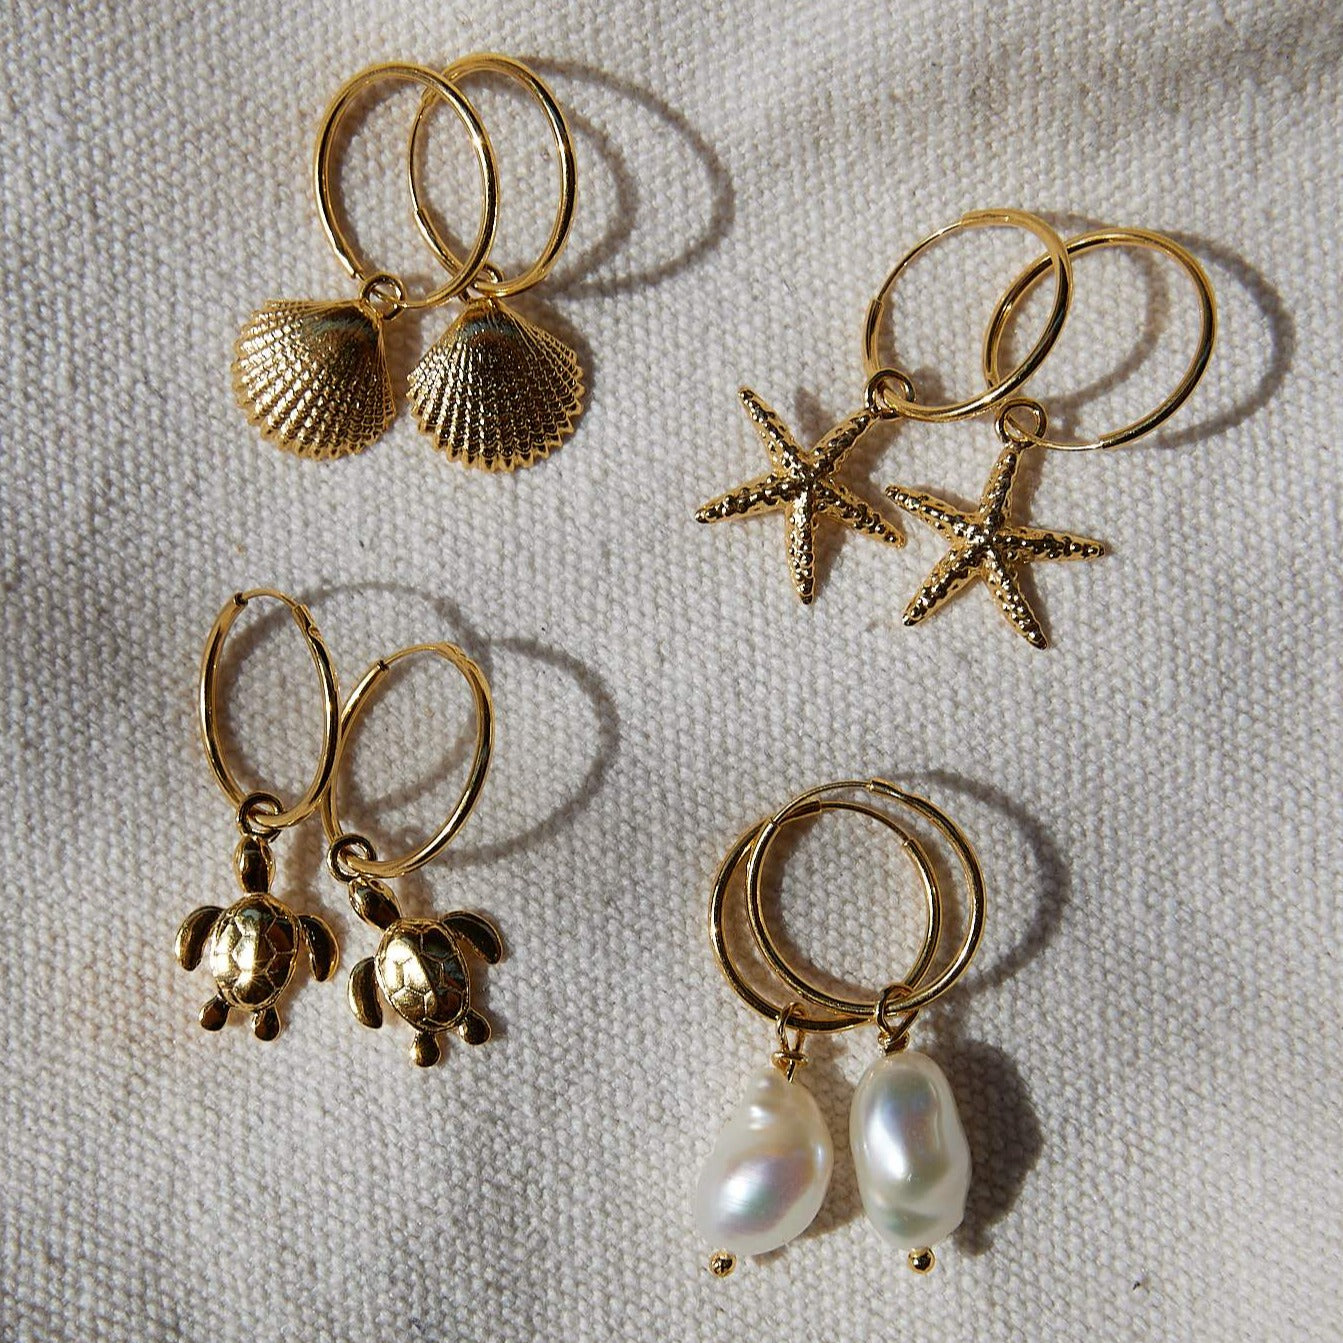 Starfish hoops 24k gold plated sterling silver